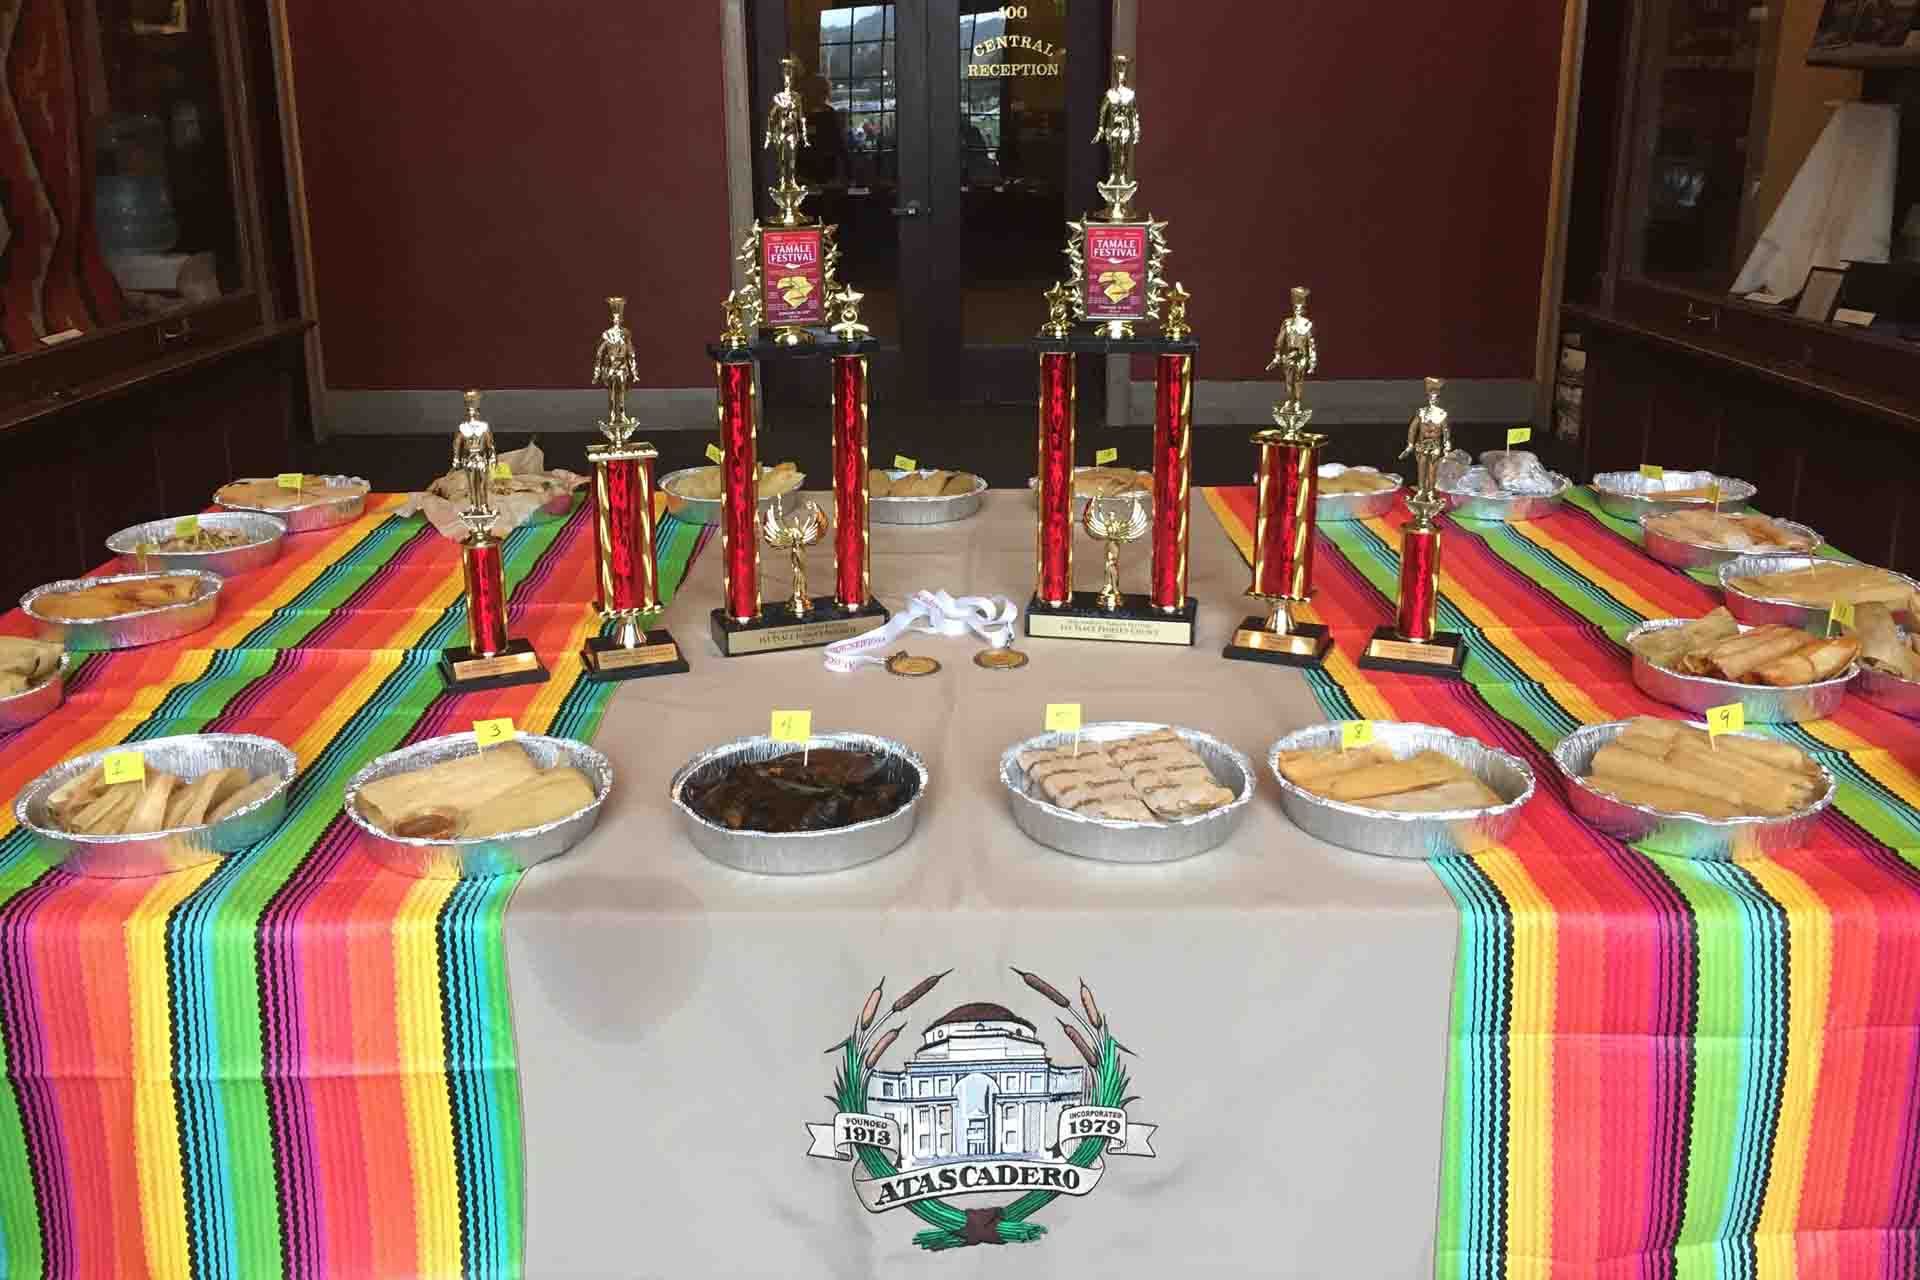 Image of tamale platters and trophies displayed on a table with colorful table runners.